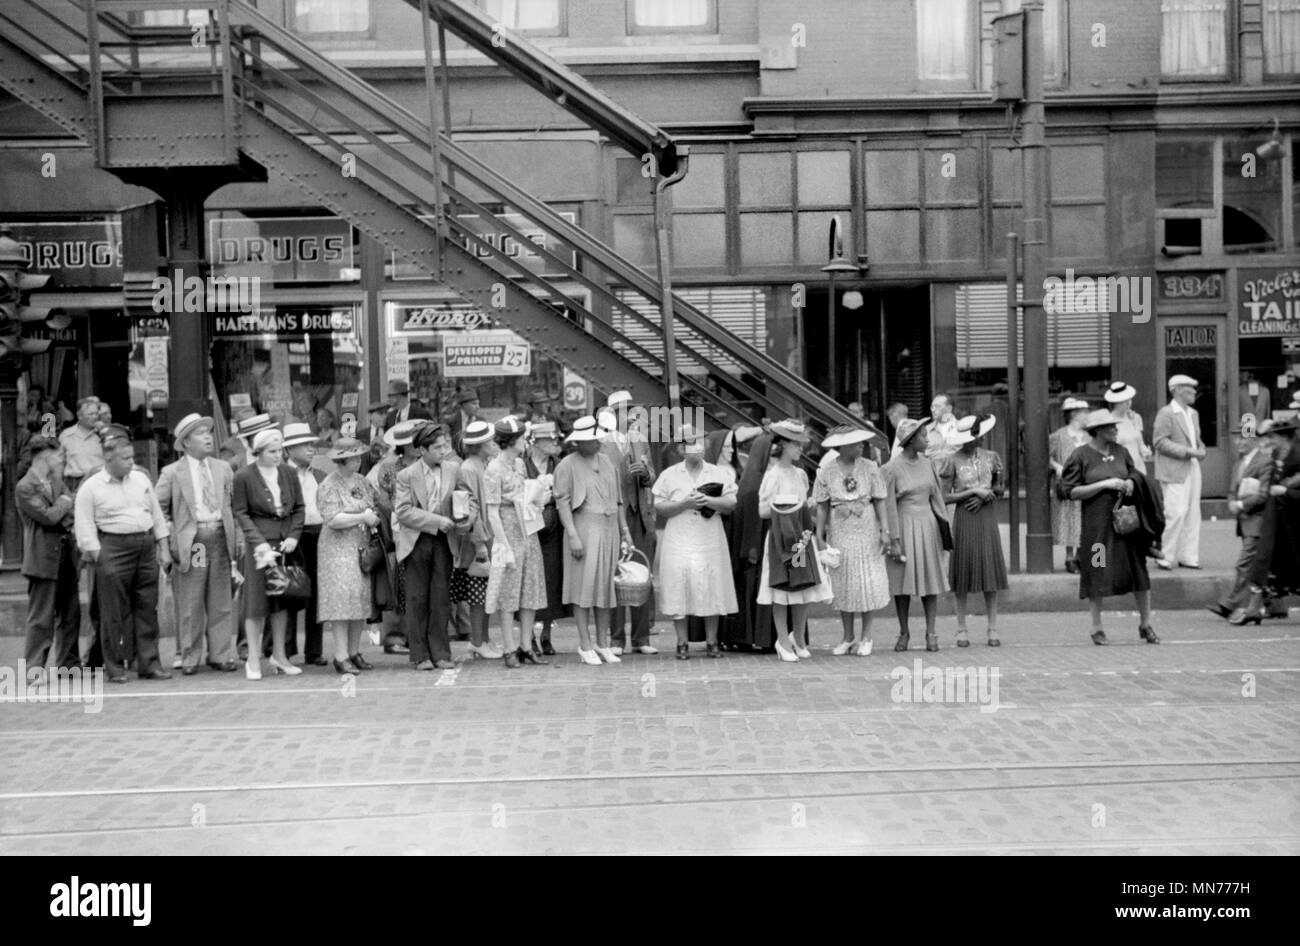 Waiting for Streetcar, Chicago, Illinois, USA, John Vachon for Farm Security Administration July 1940 Stock Photo